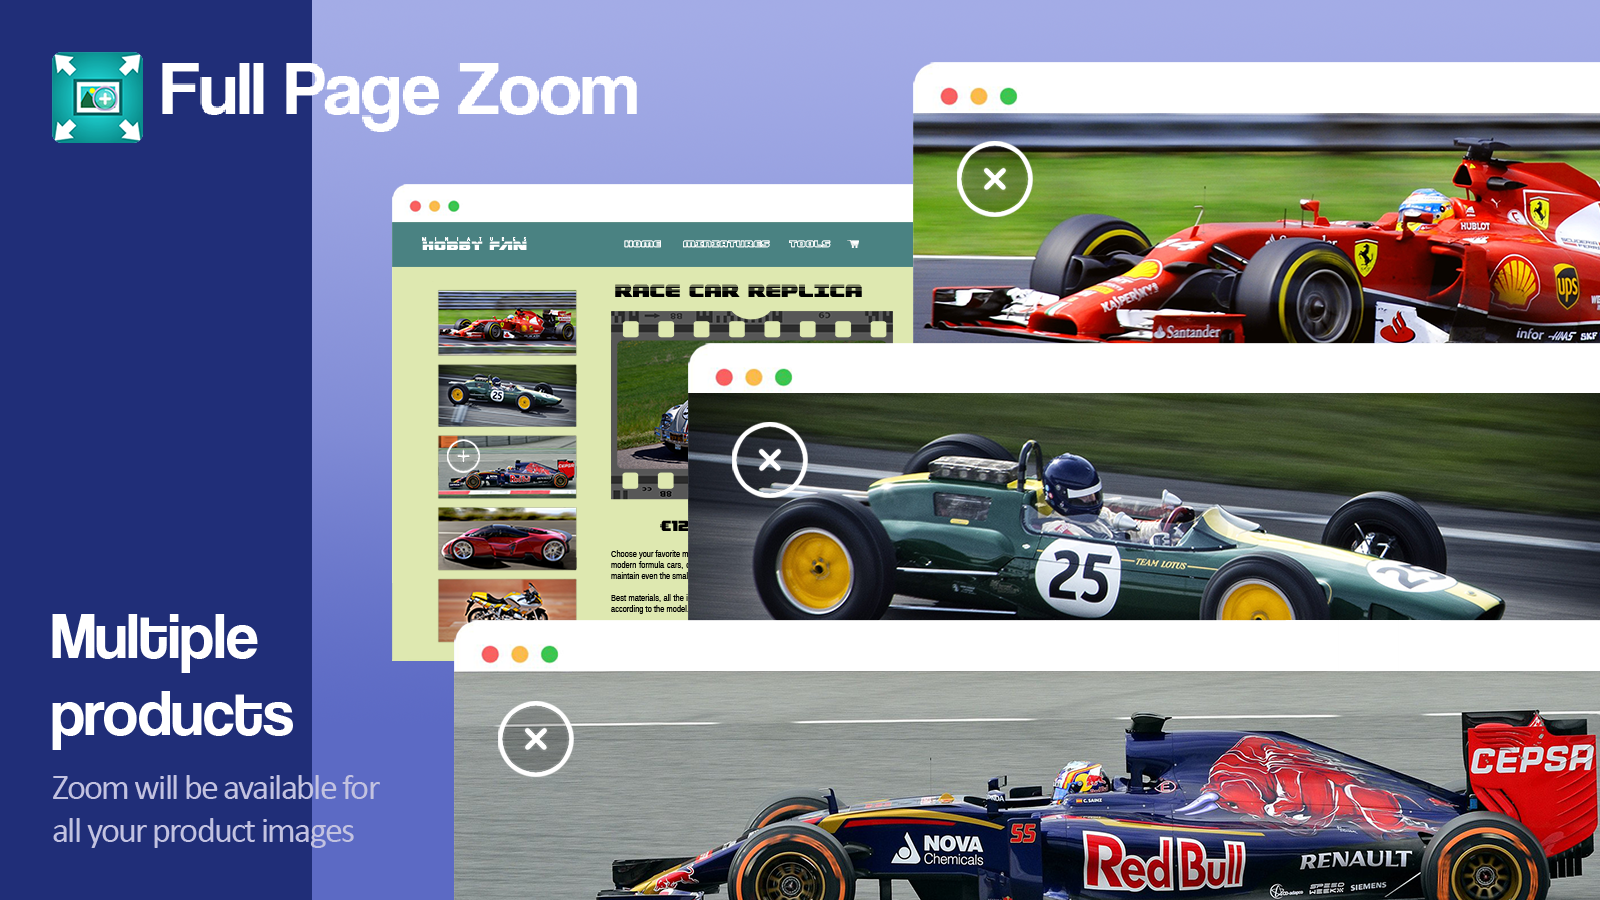 Zoom will be available for all your product images